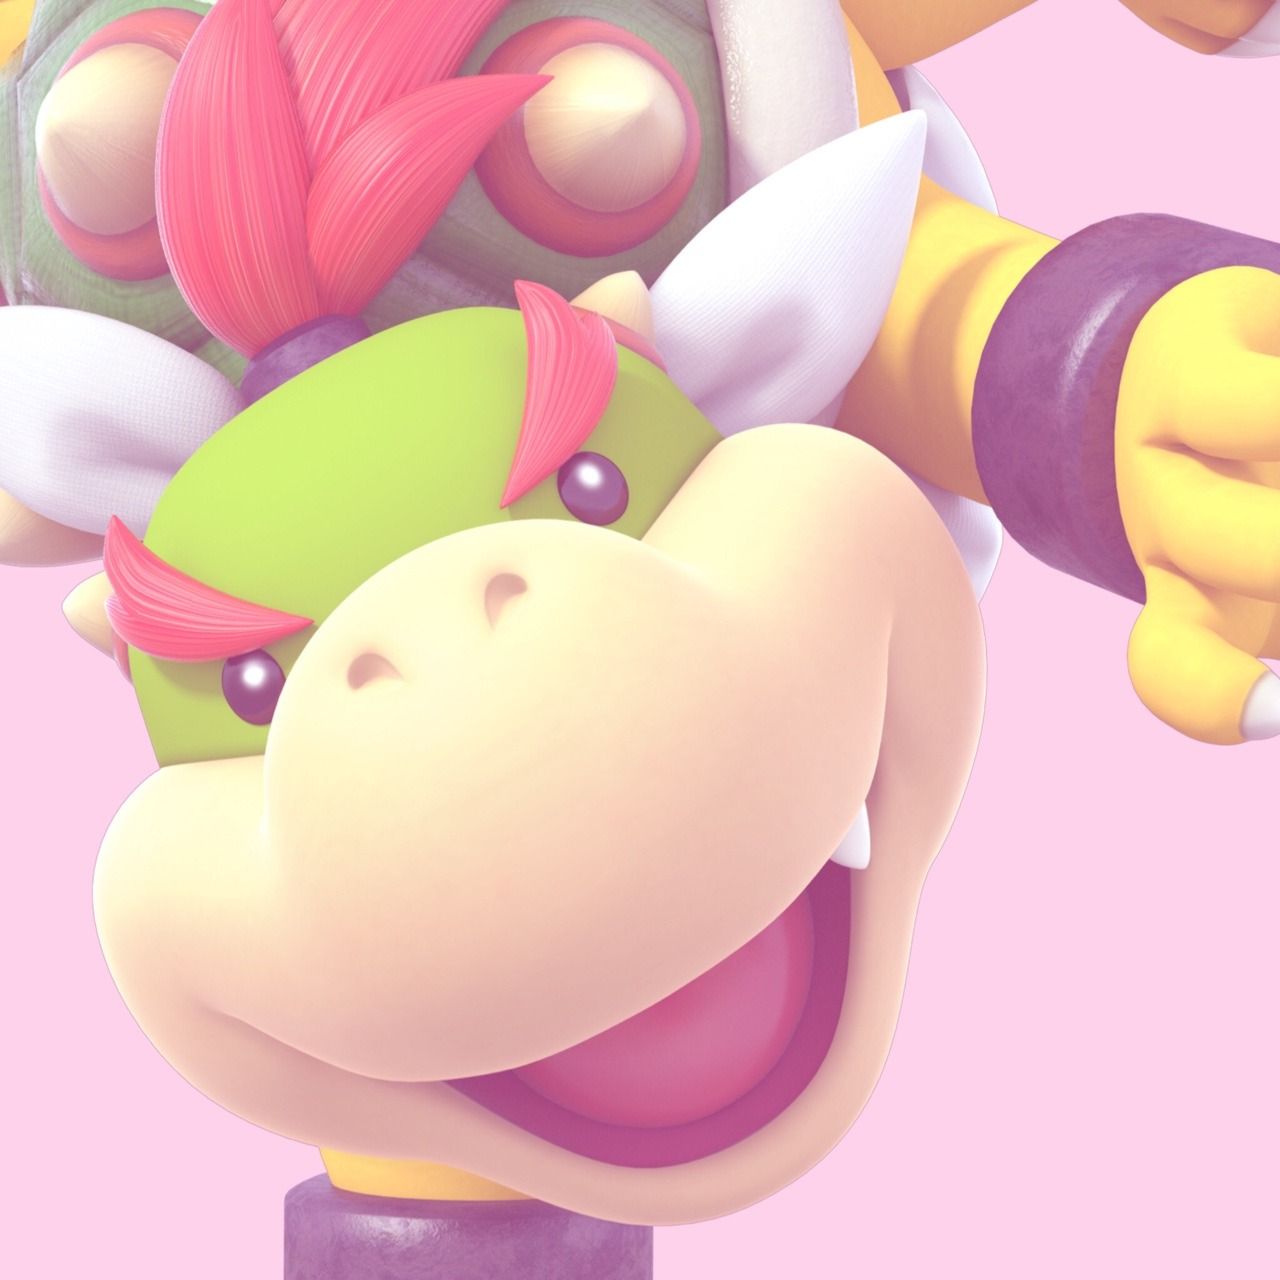 A picture of Bowsette from Super Mario games. - Bowser